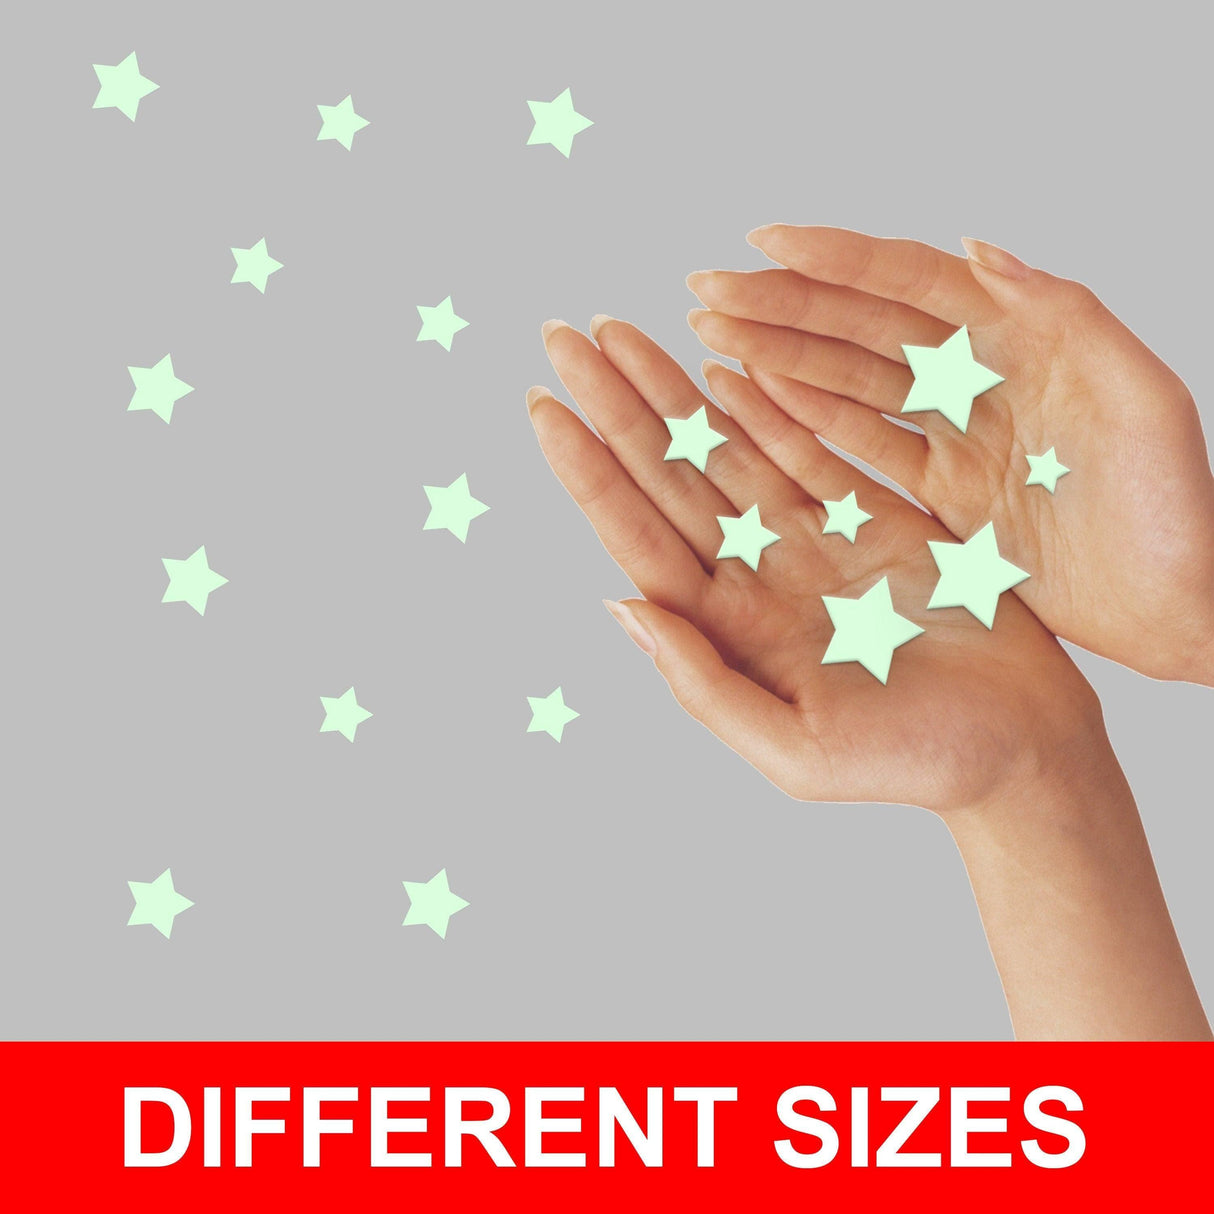 850 Pcs Glow in the Dark Stars Stickers the Star Glowing Ceiling Decals for  Wall Room Kids Decor Night Light Sky Realistic Stars Stick 